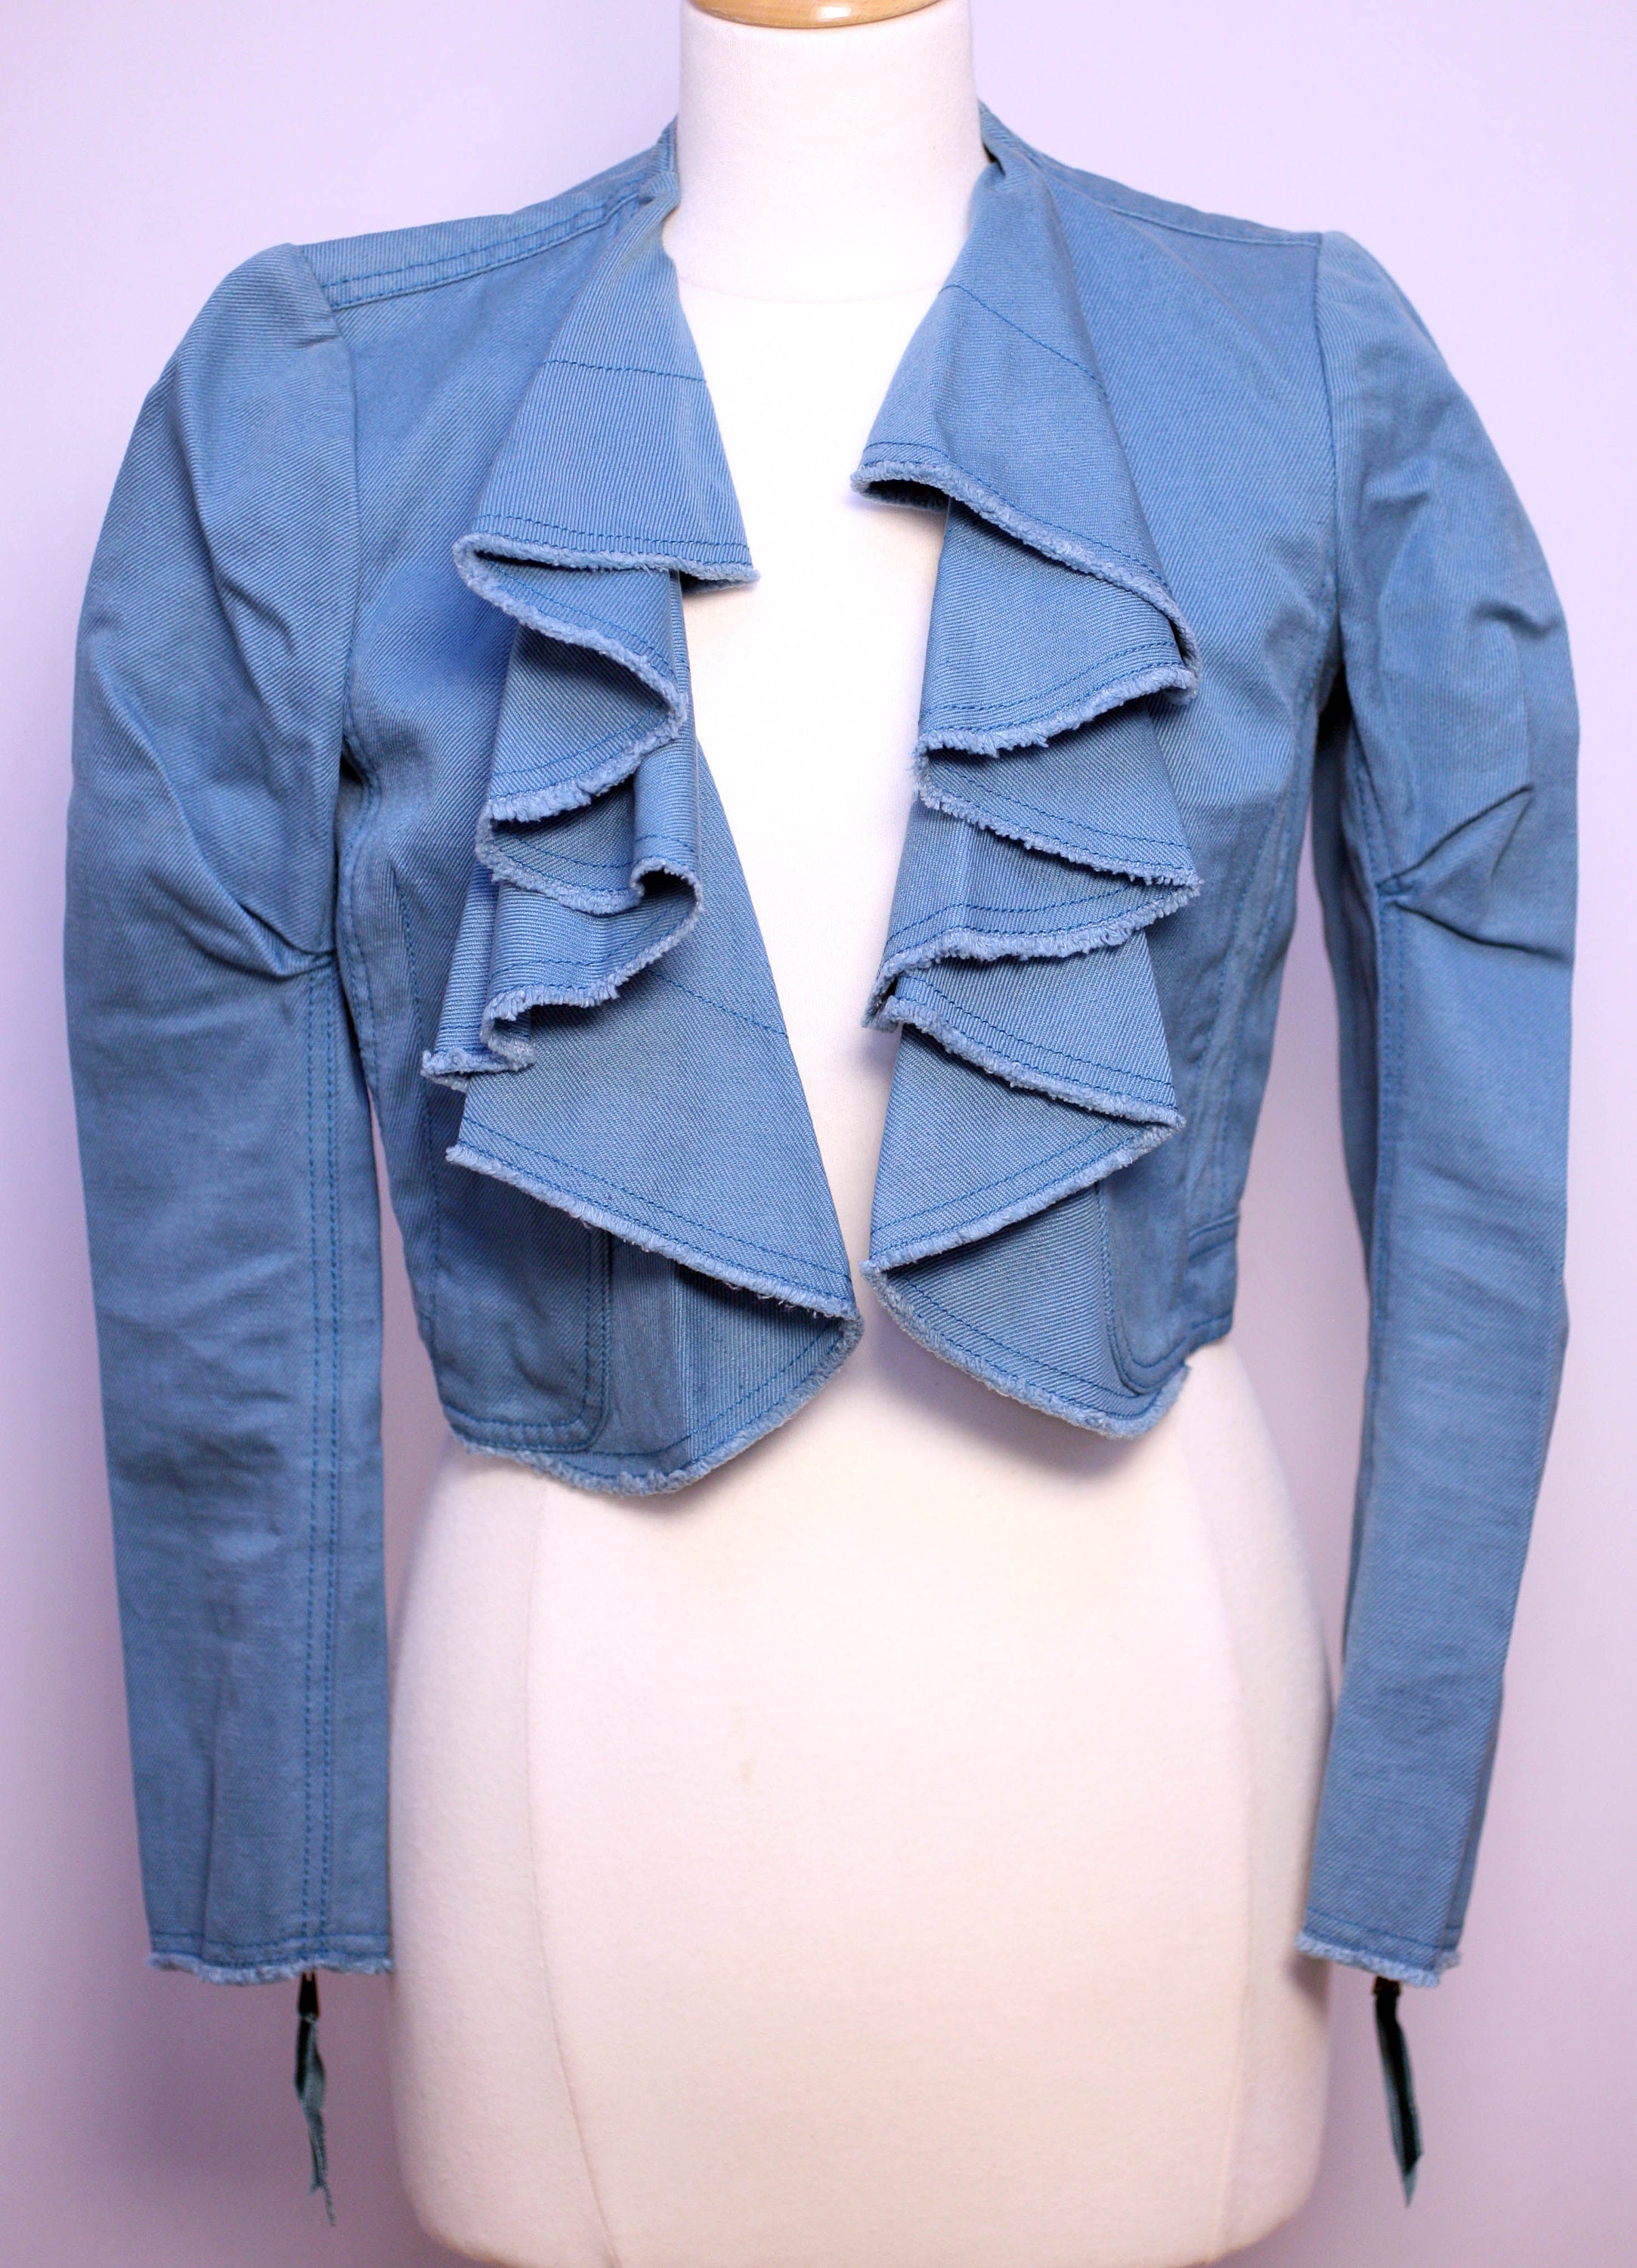 Upcycled Louis Vuitton Jean Jacket Blue Size 00 - $60 (69% Off